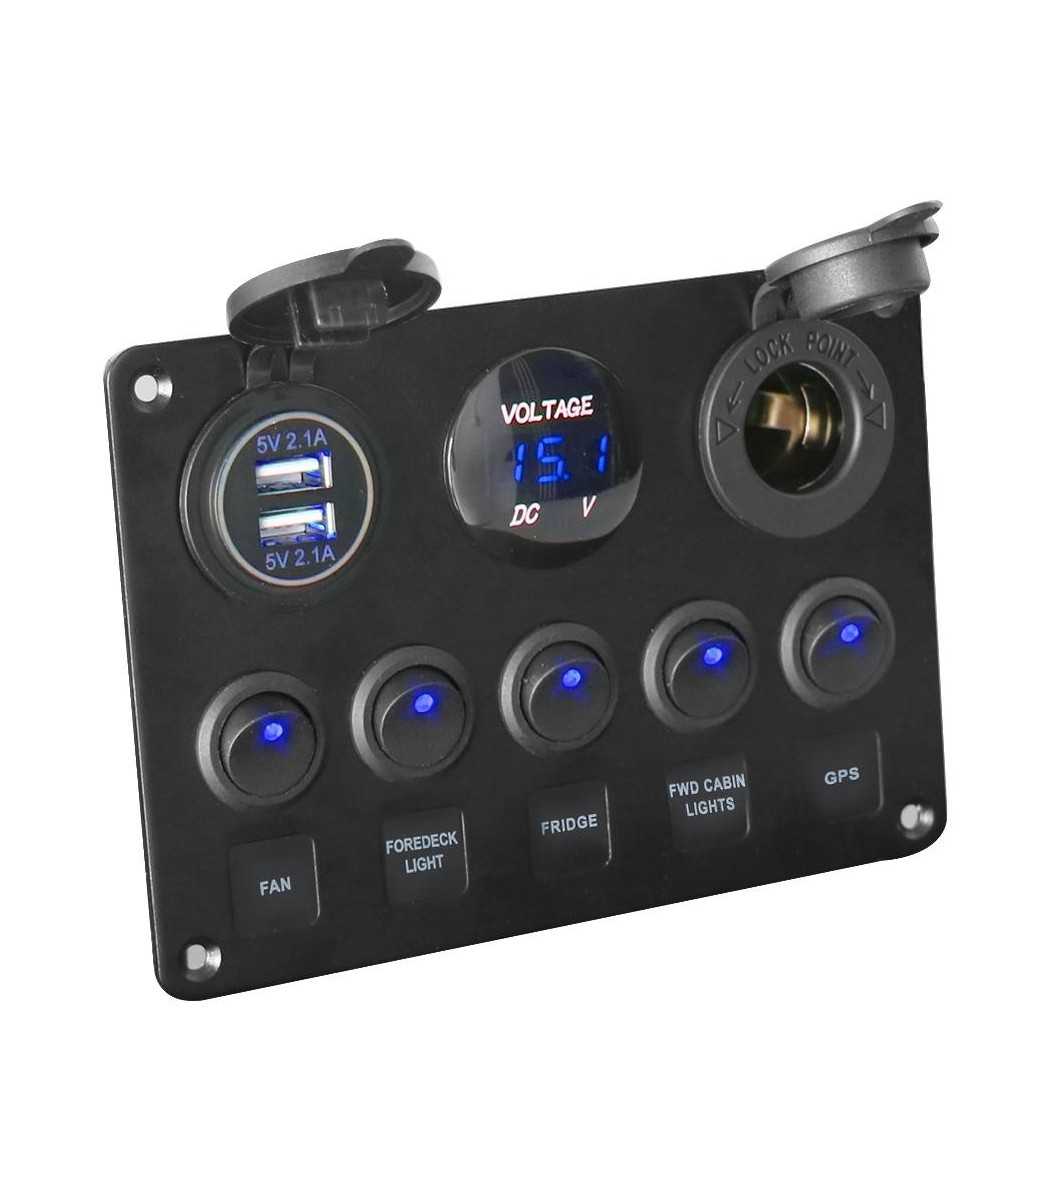 Gang LED Switch Panel Switch Panel Waterproof Light Bar Switch Panel with Cigarette Lighter and Dual USB and Voltmeter for 12V Cars Trailers,UTVs - 3